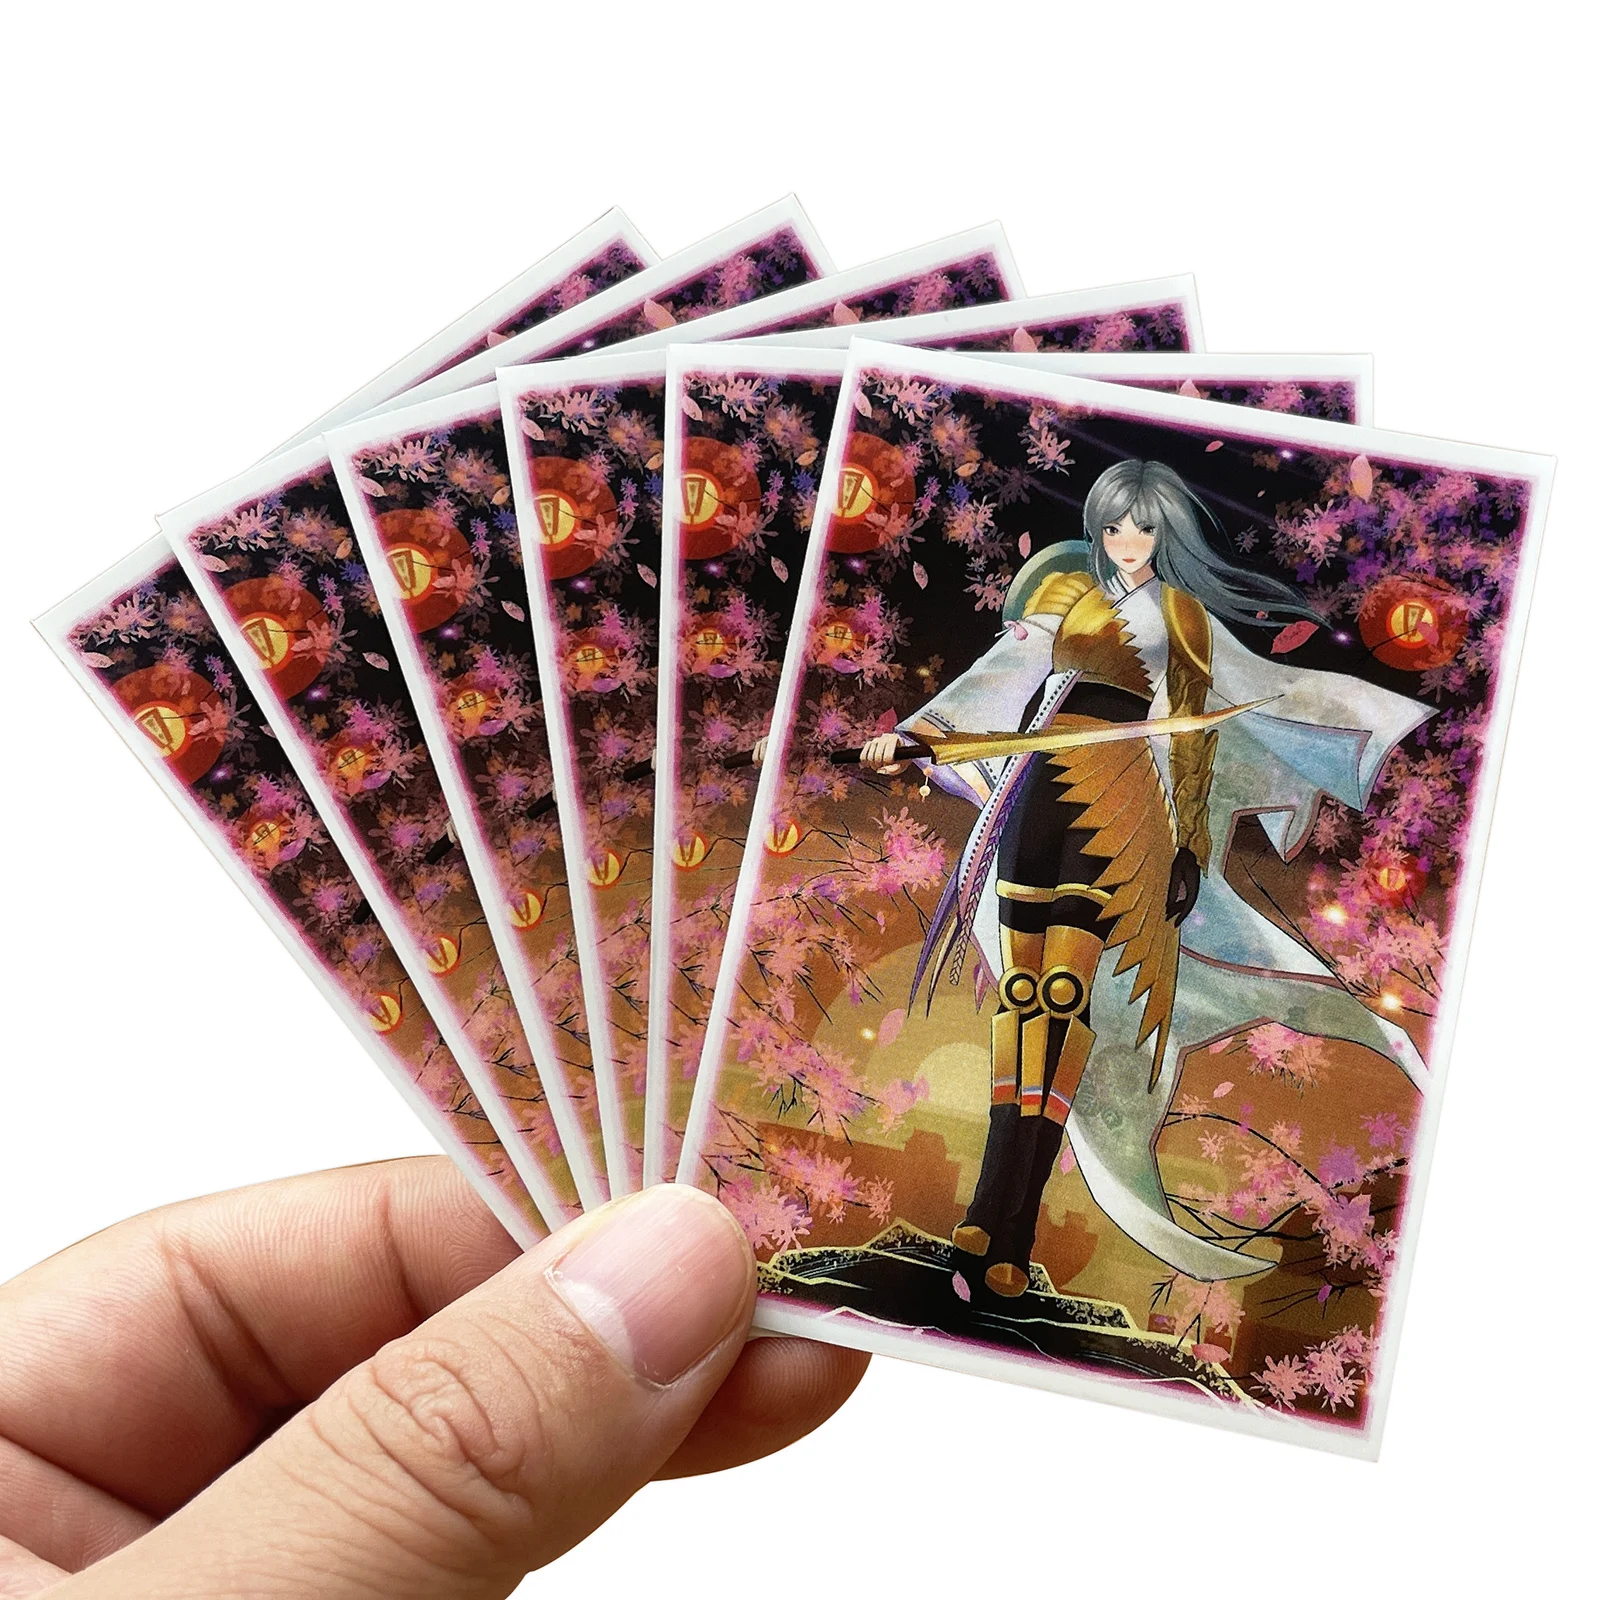 60PCS/BAG TCG Card Sleeves MGT Wandering Emperor Sleeves Game Characters Protector Cards Cover Shield Graphics Color Sleeves PKM funny horror movie characters credit card id holder bag student women travel bank bus business card cover badge accessories gift